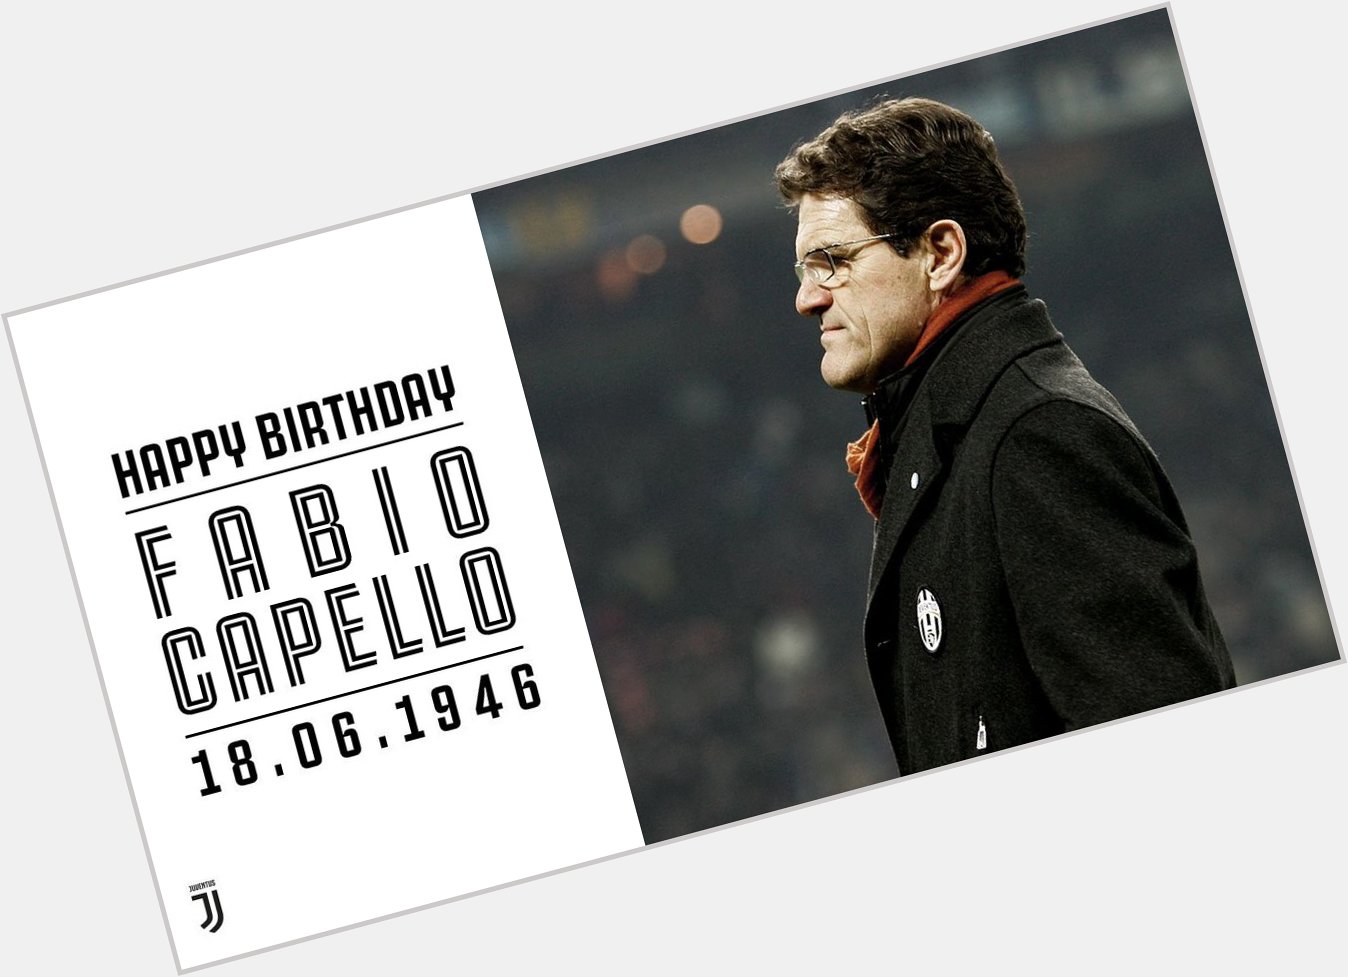 Happy 72nd birthday to a   Scudetti-winning player and manager , Fabio Capello!  